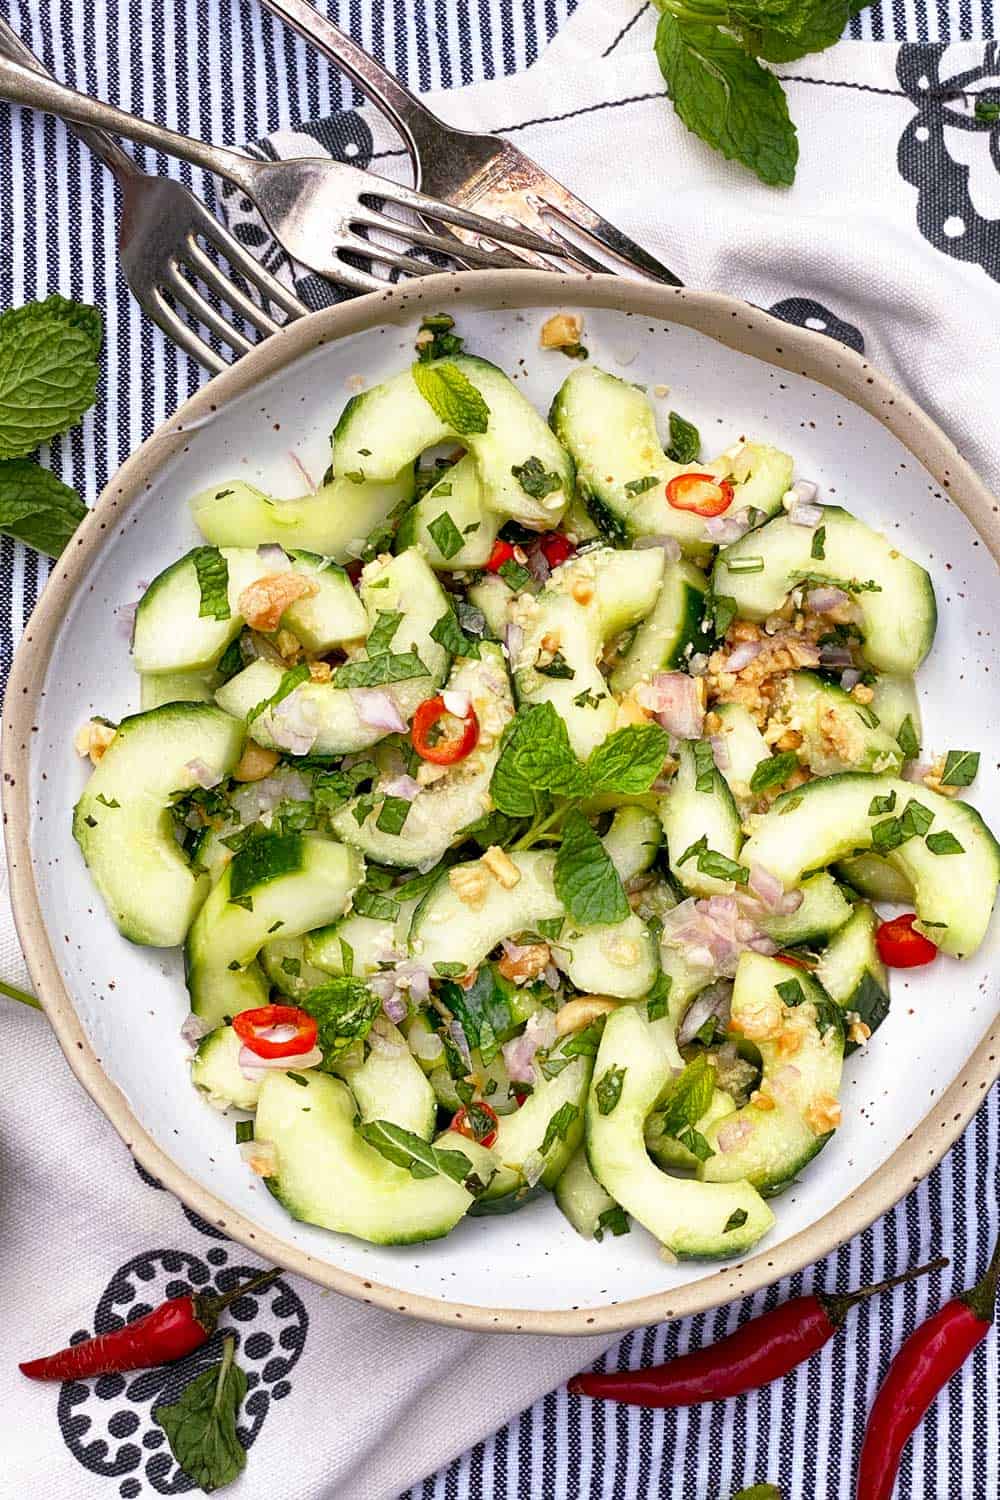 Thai cucumber salad with sliced red chili peppers, chopped mint leaves and chopped peanuts, in a white bowl on a pin-striped black and white dish towel with 3 forks